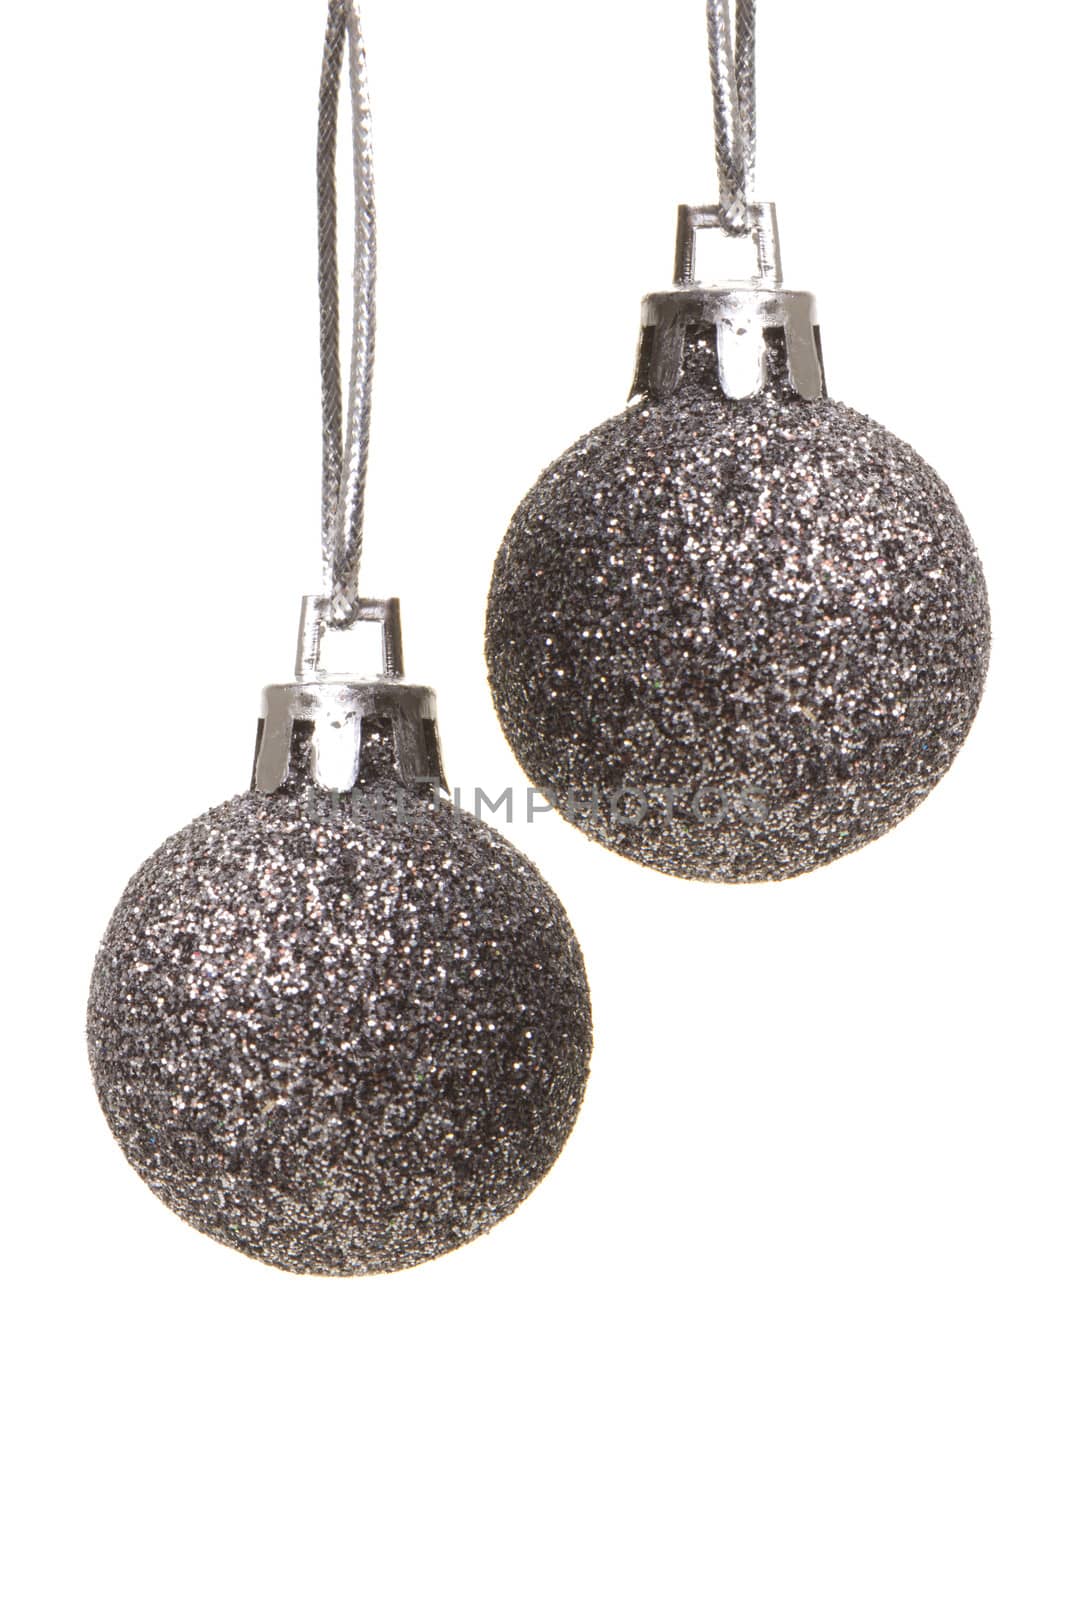 christmas baubles silver by Tomjac1980